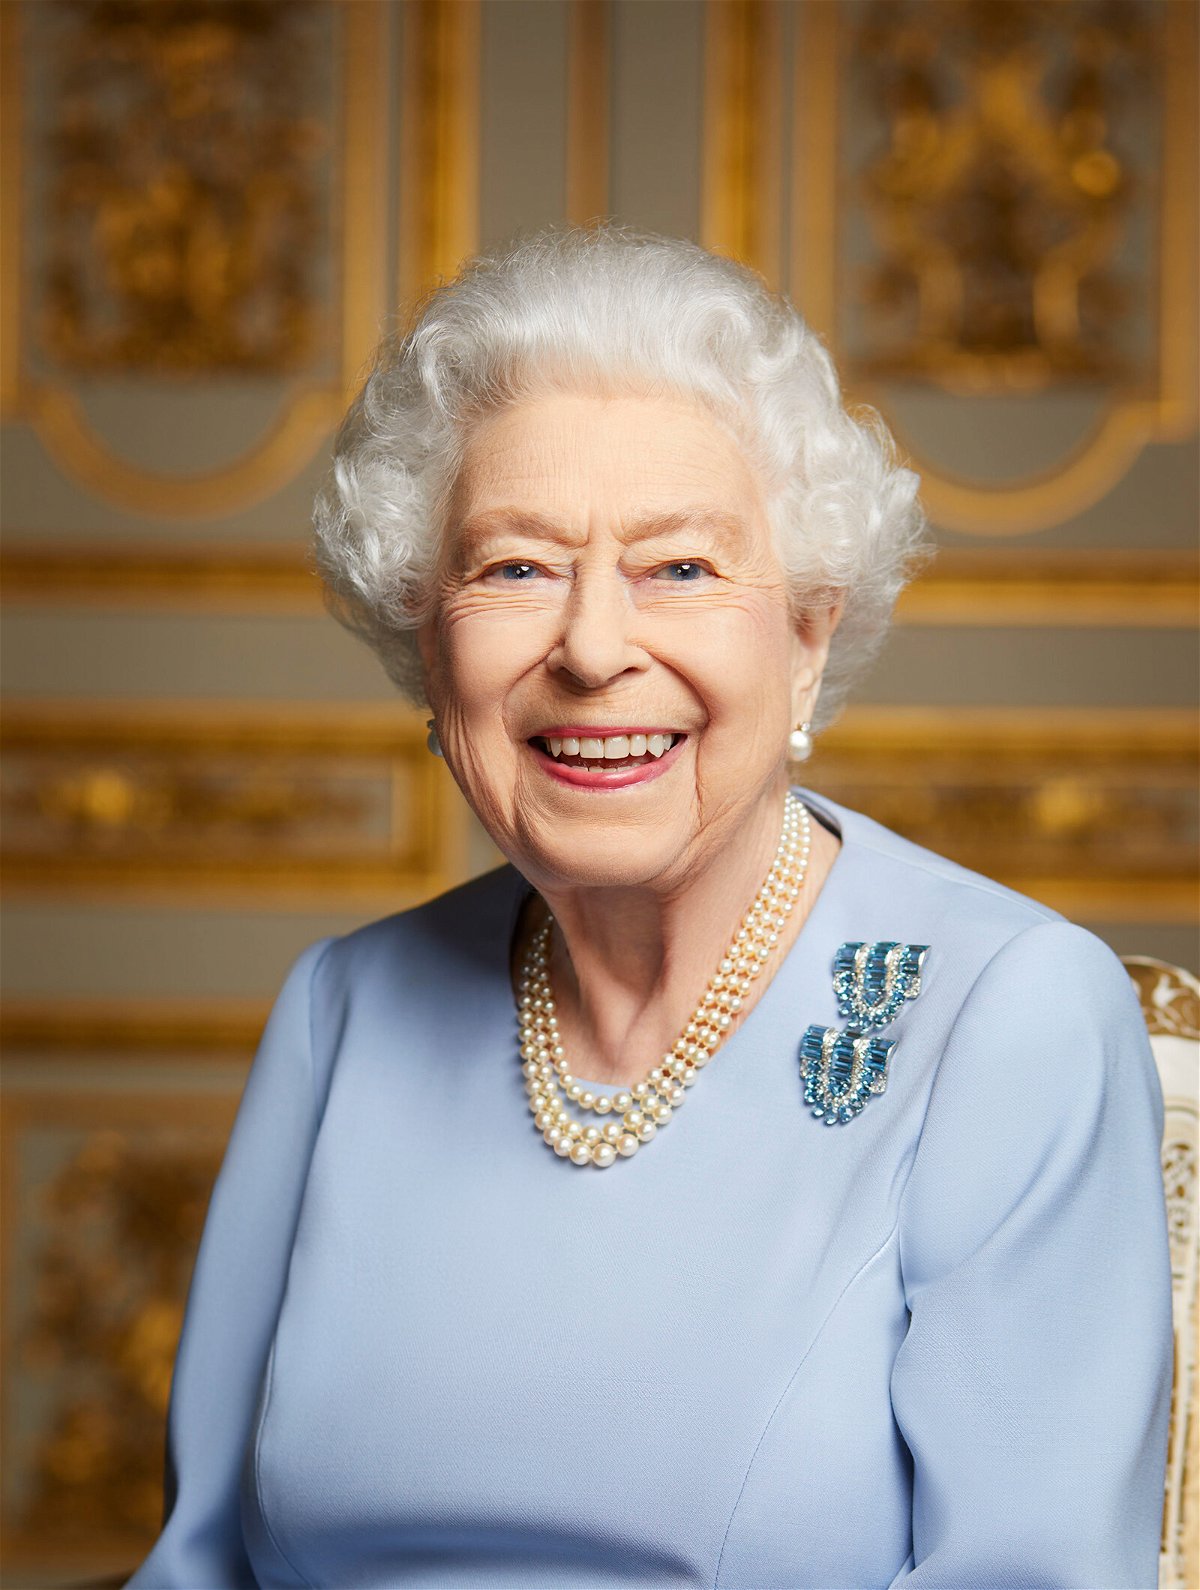 <i>Ranald Mackechnie/AP</i><br/>The previously unreleased portrait shows Queen Elizabeth II photographed at Windsor Castle